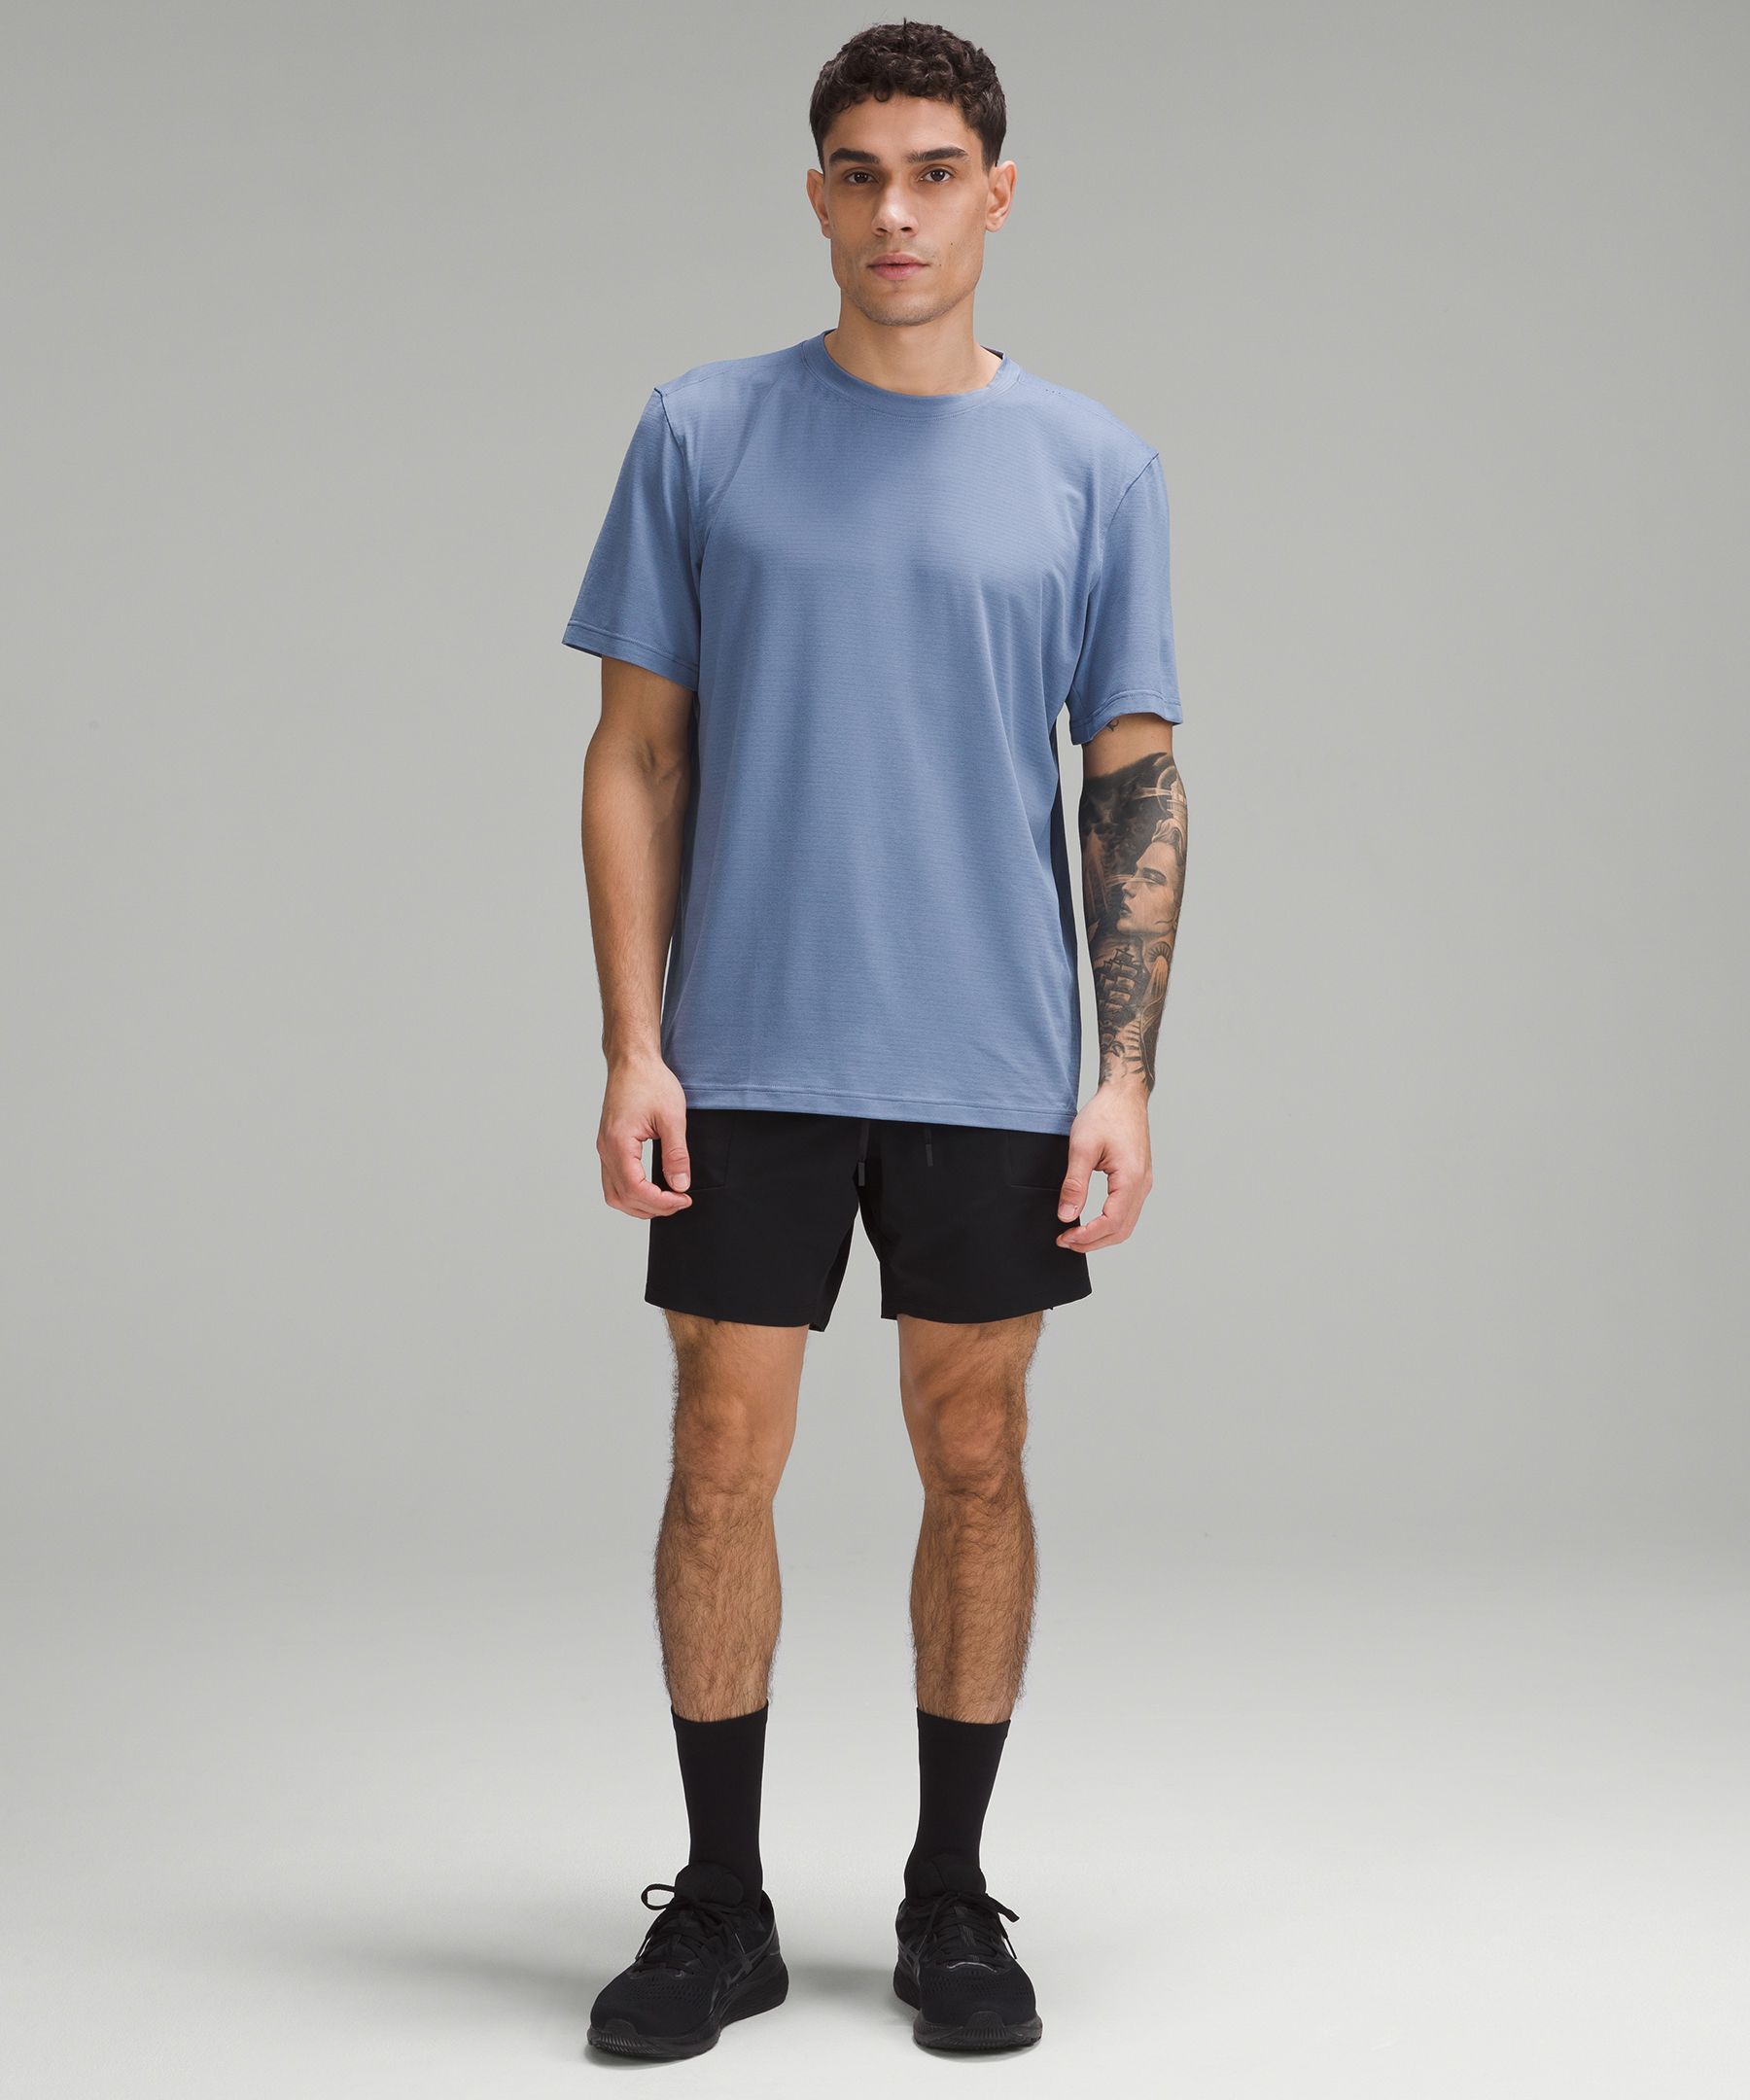 License to Train Relaxed-Fit Short-Sleeve Shirt | Men's Short Sleeve Shirts & Tee's